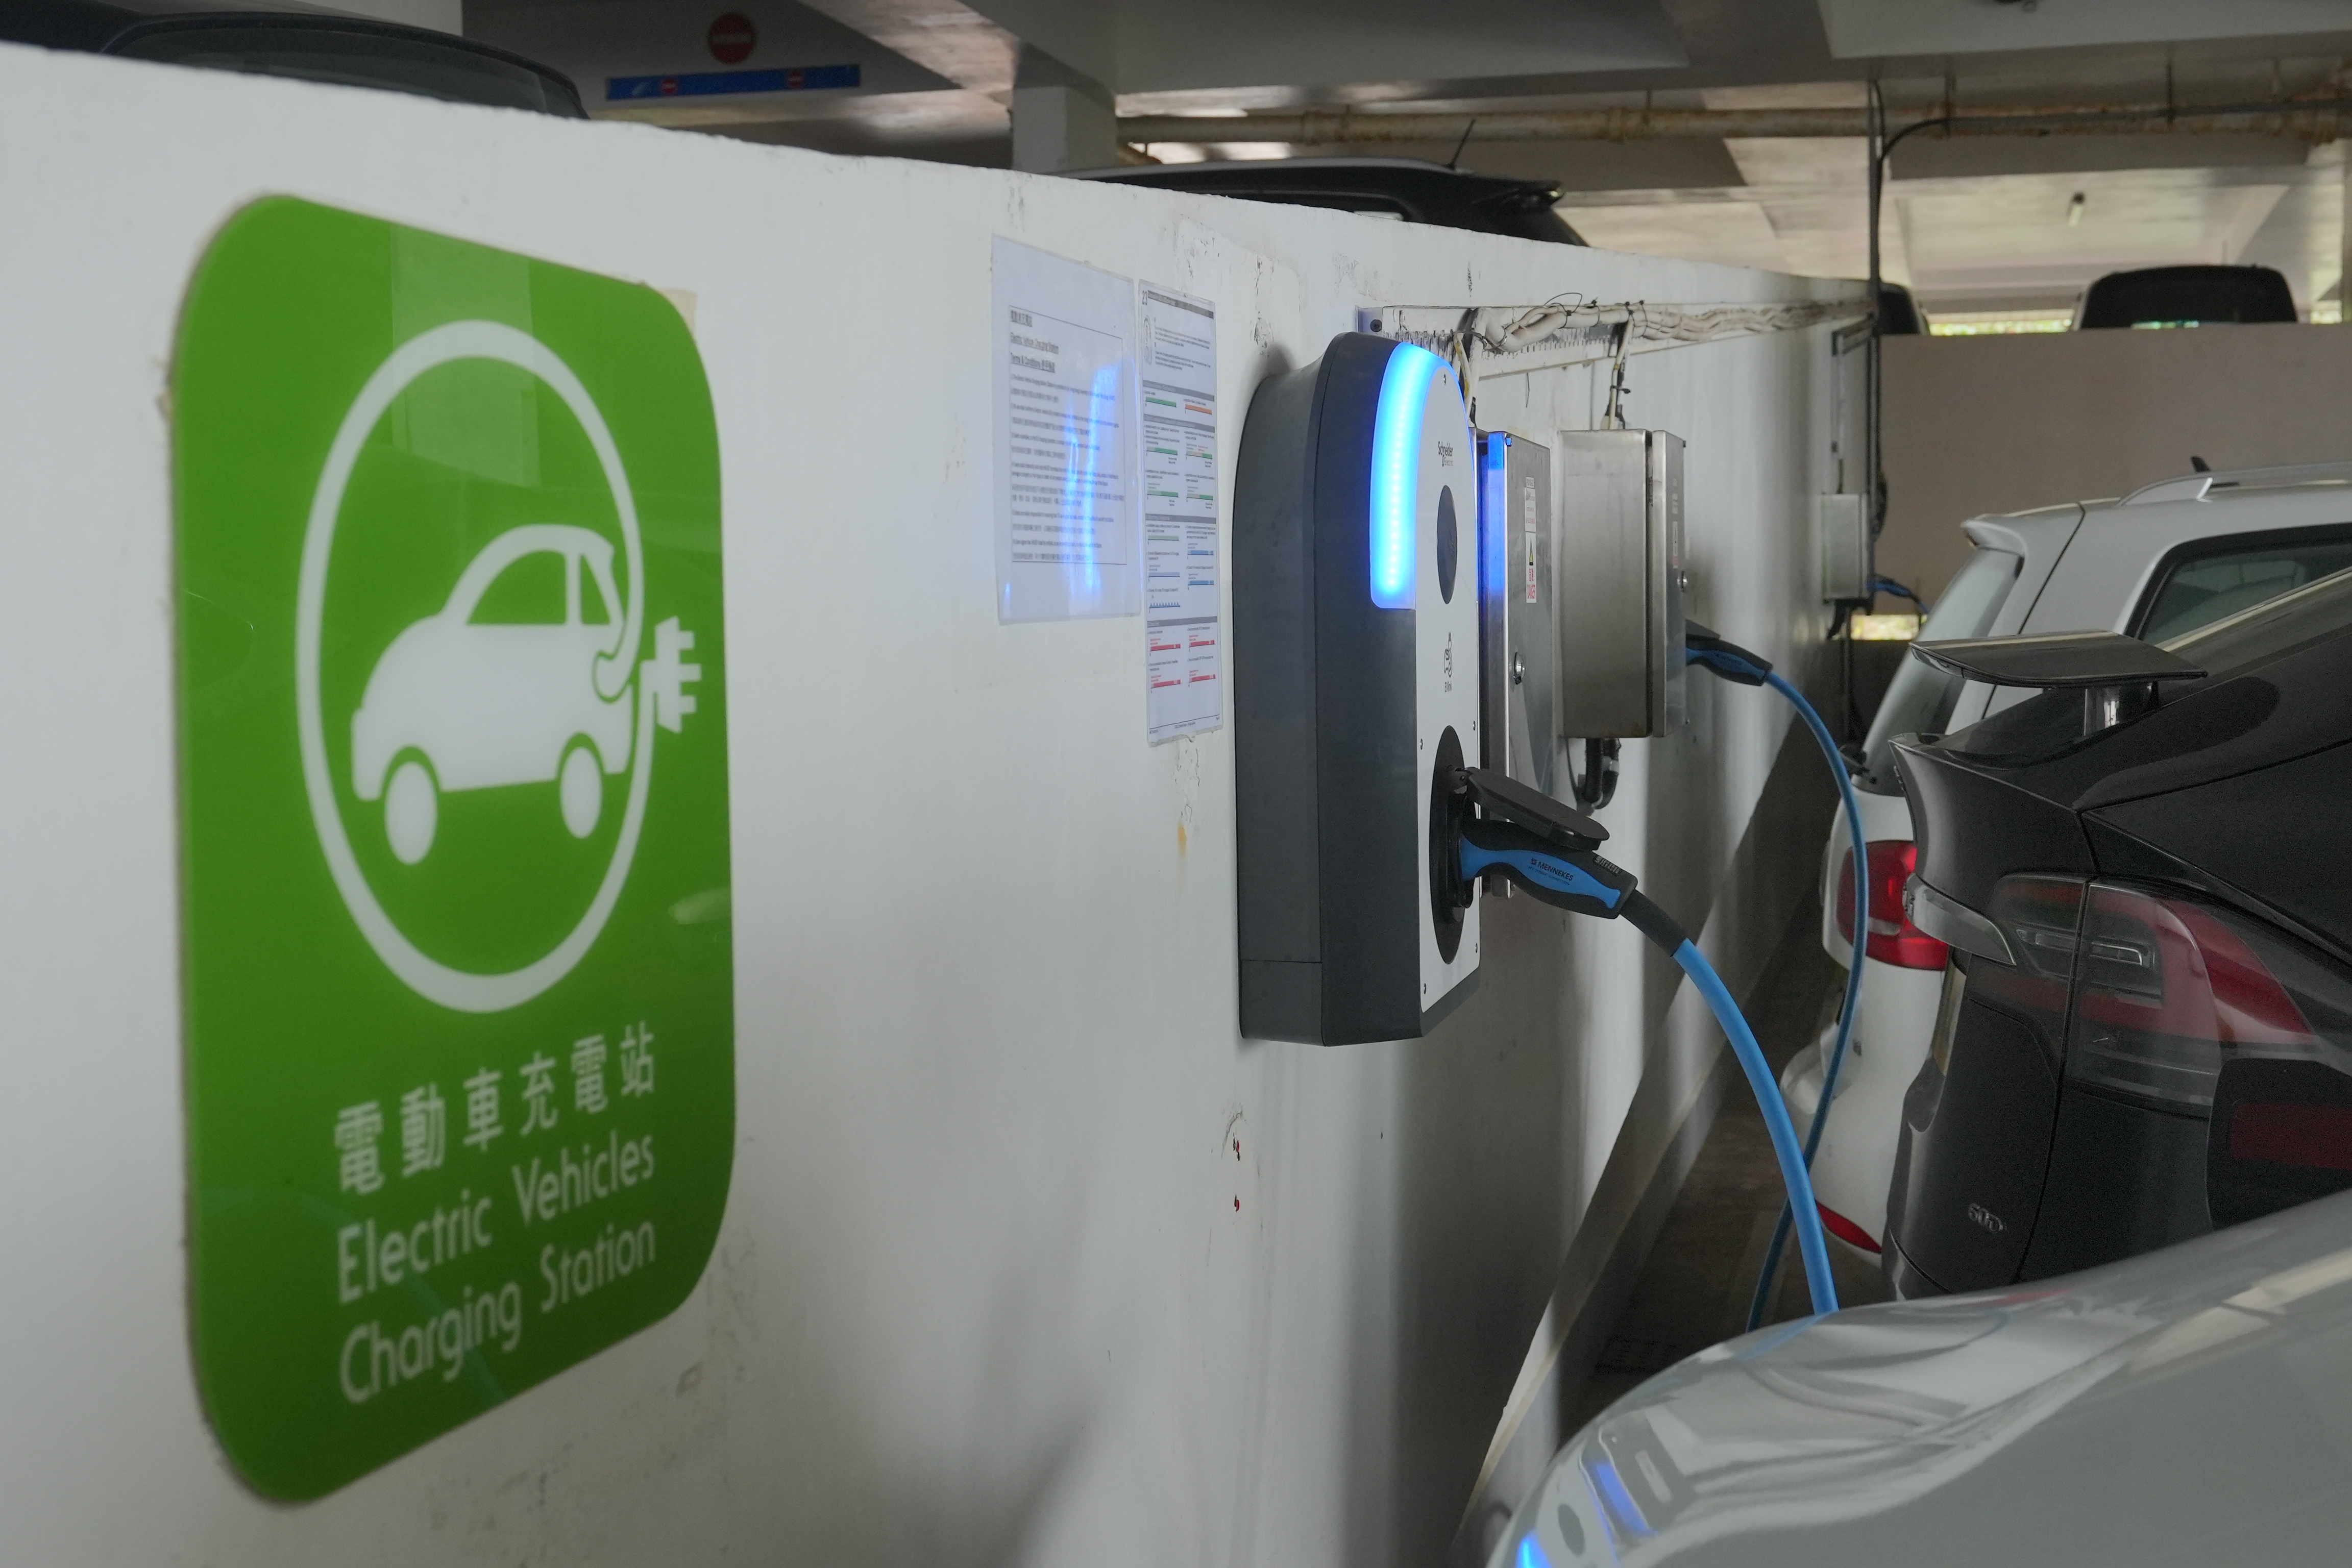 Since 2022, HKUST has already installed EV infrastructure to support over 150 EV chargers. The picture shows an EV Charging Station located at HKUST’s Indoor Carpark Building.